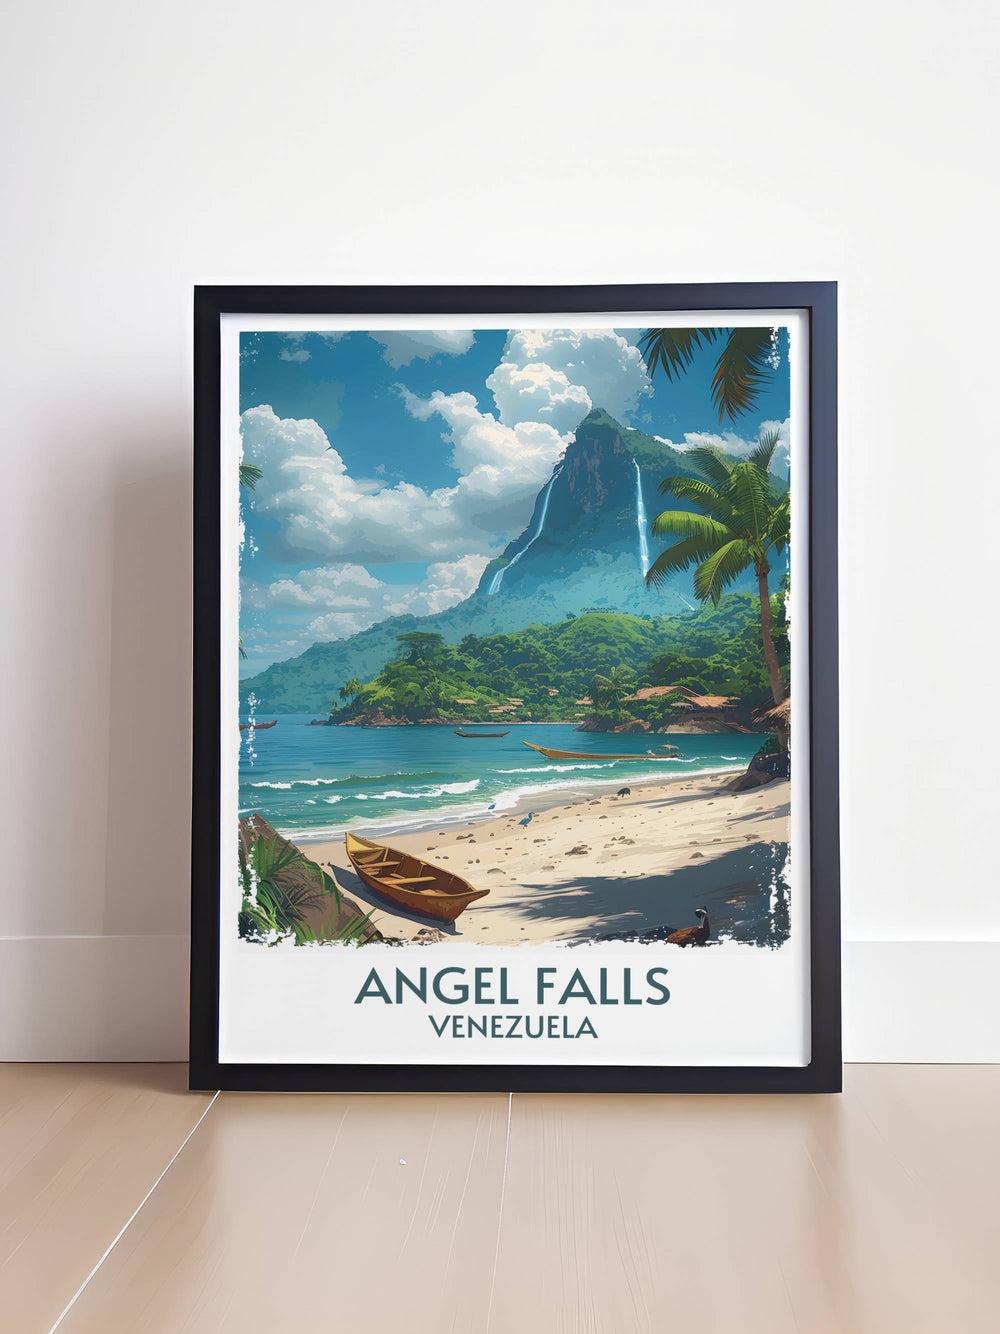 This Angel Falls Canaima National Park artwork brings a piece of Venezuela's wonders to your living space, combining art with adventure.